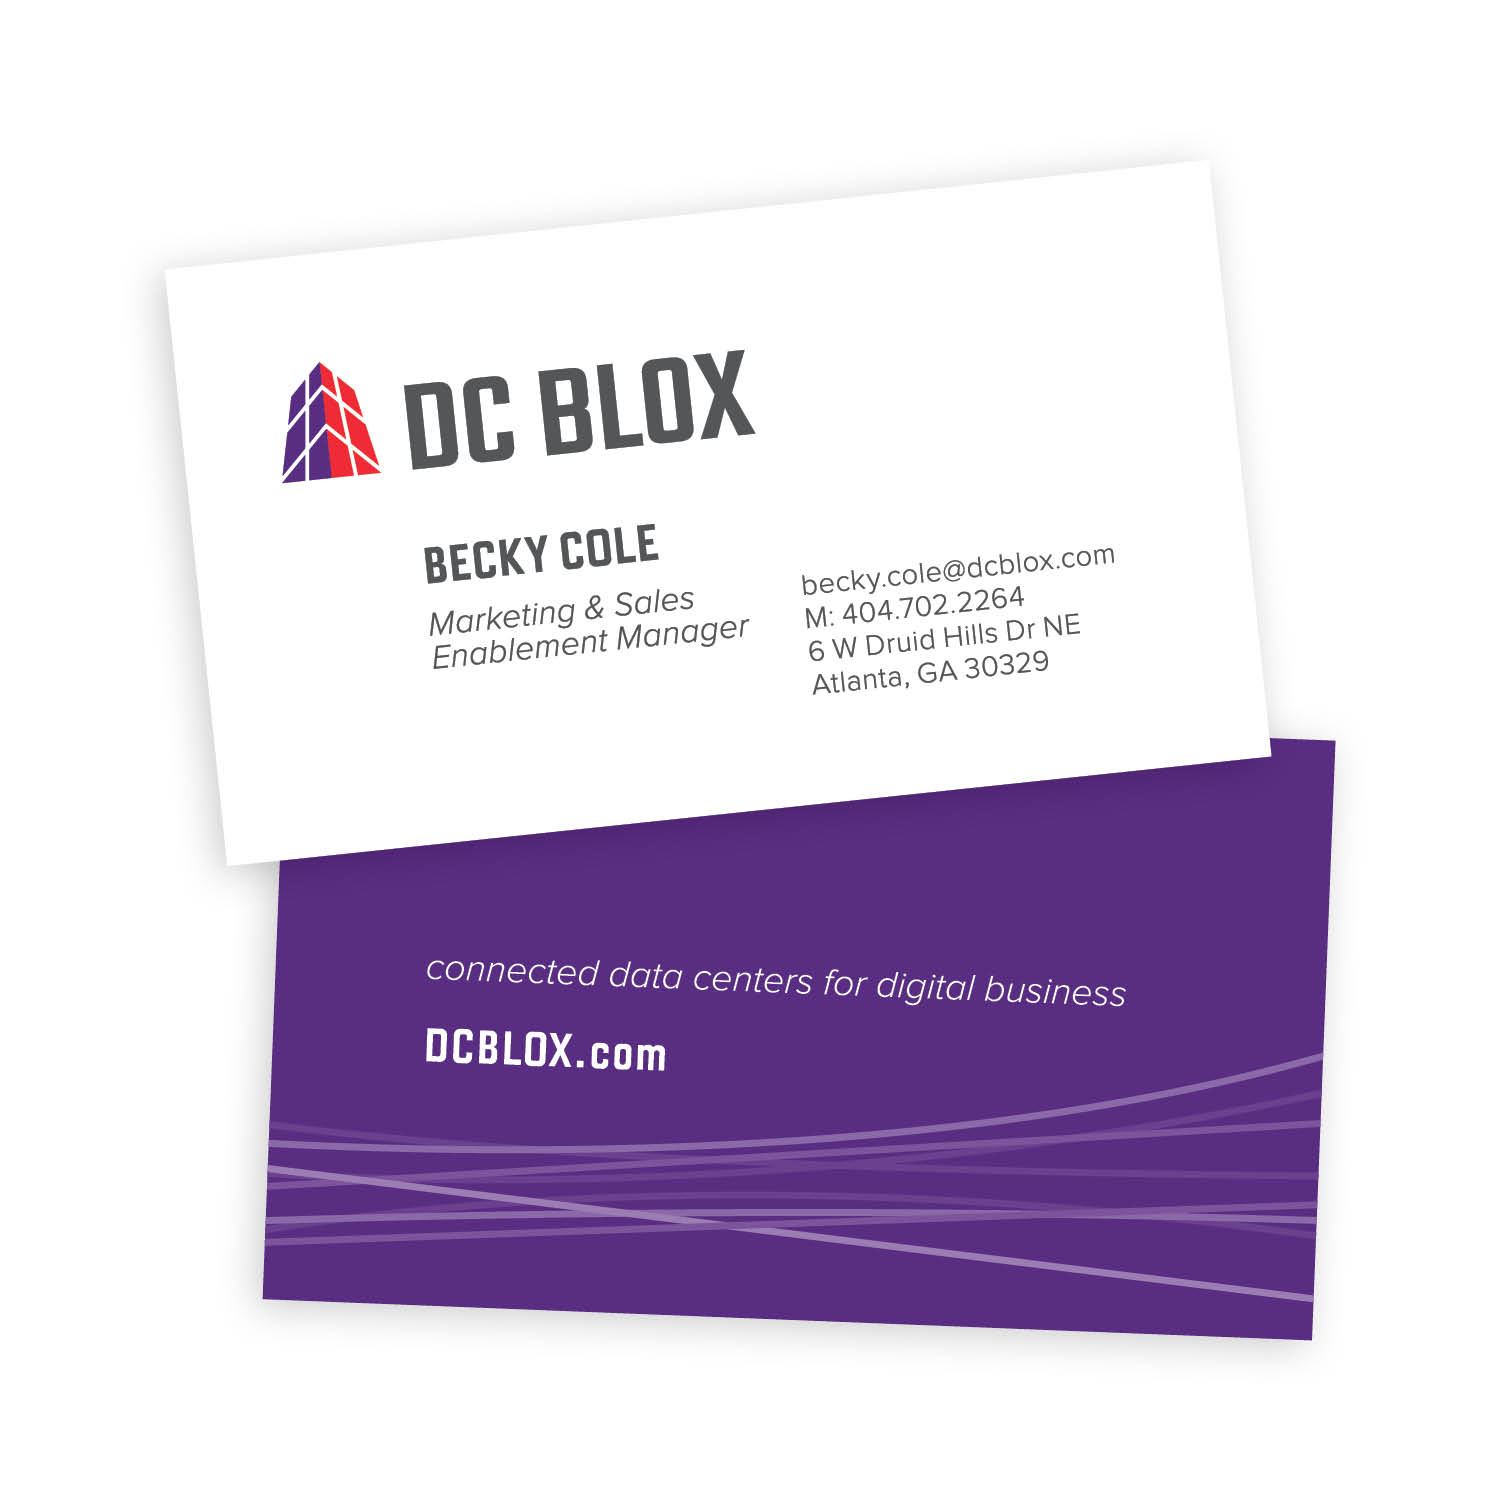 DC BLOX business cards